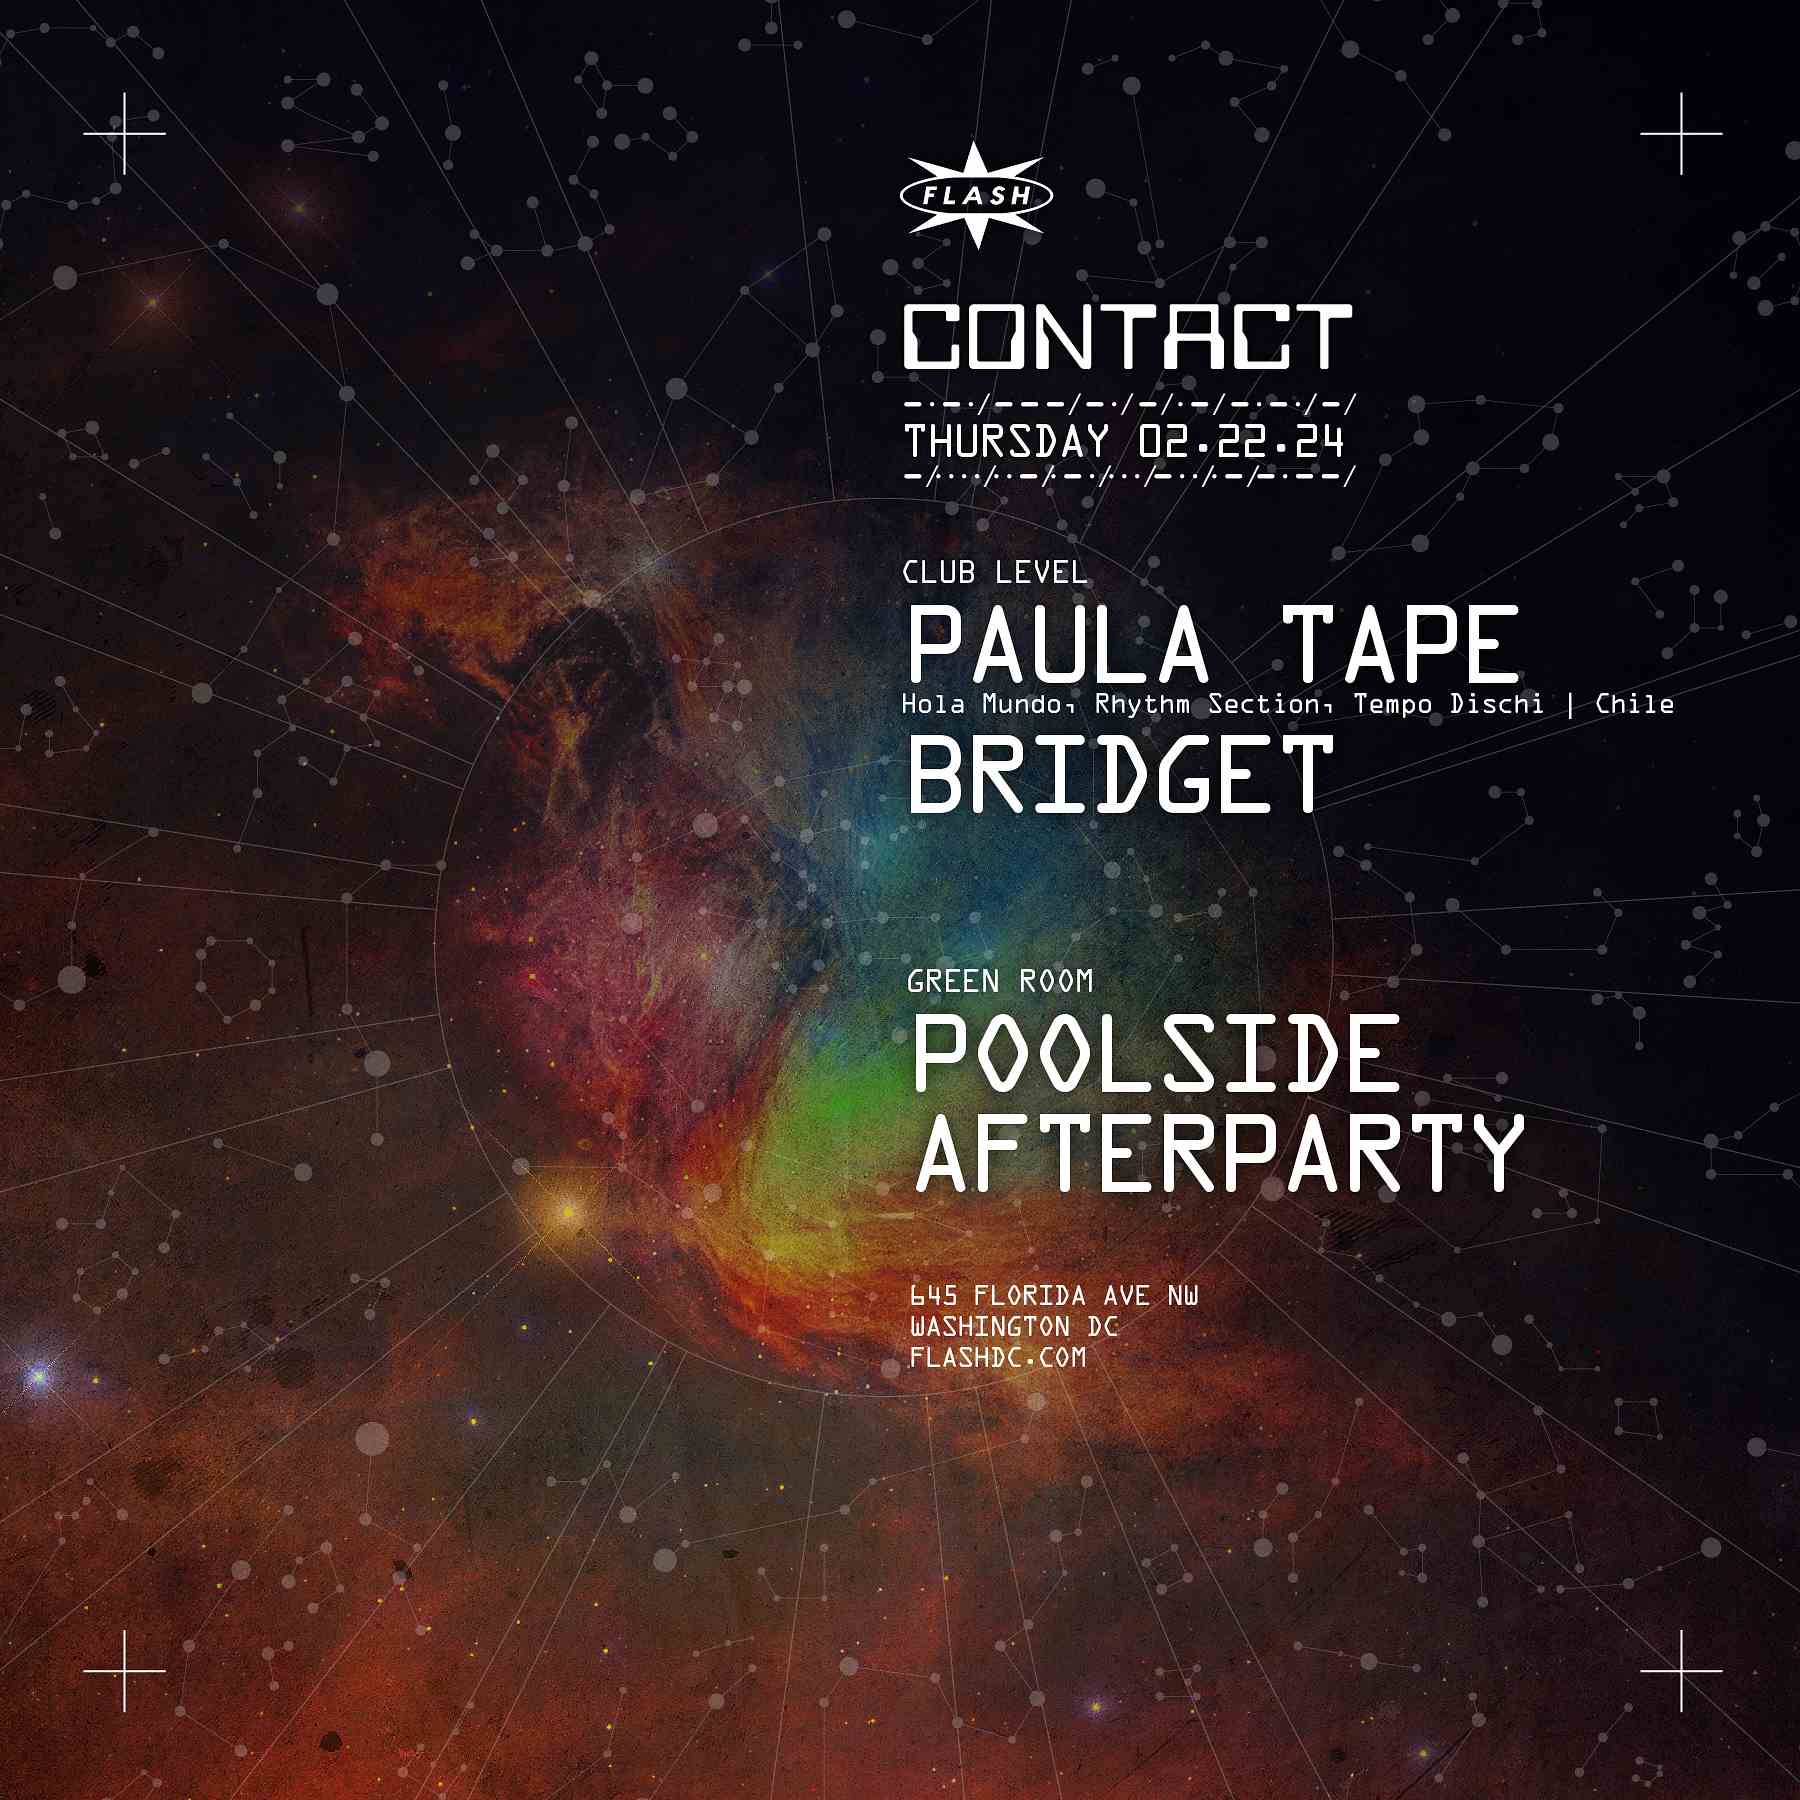 Event image for CONTACT: Paula Tape - Poolside Afterparty